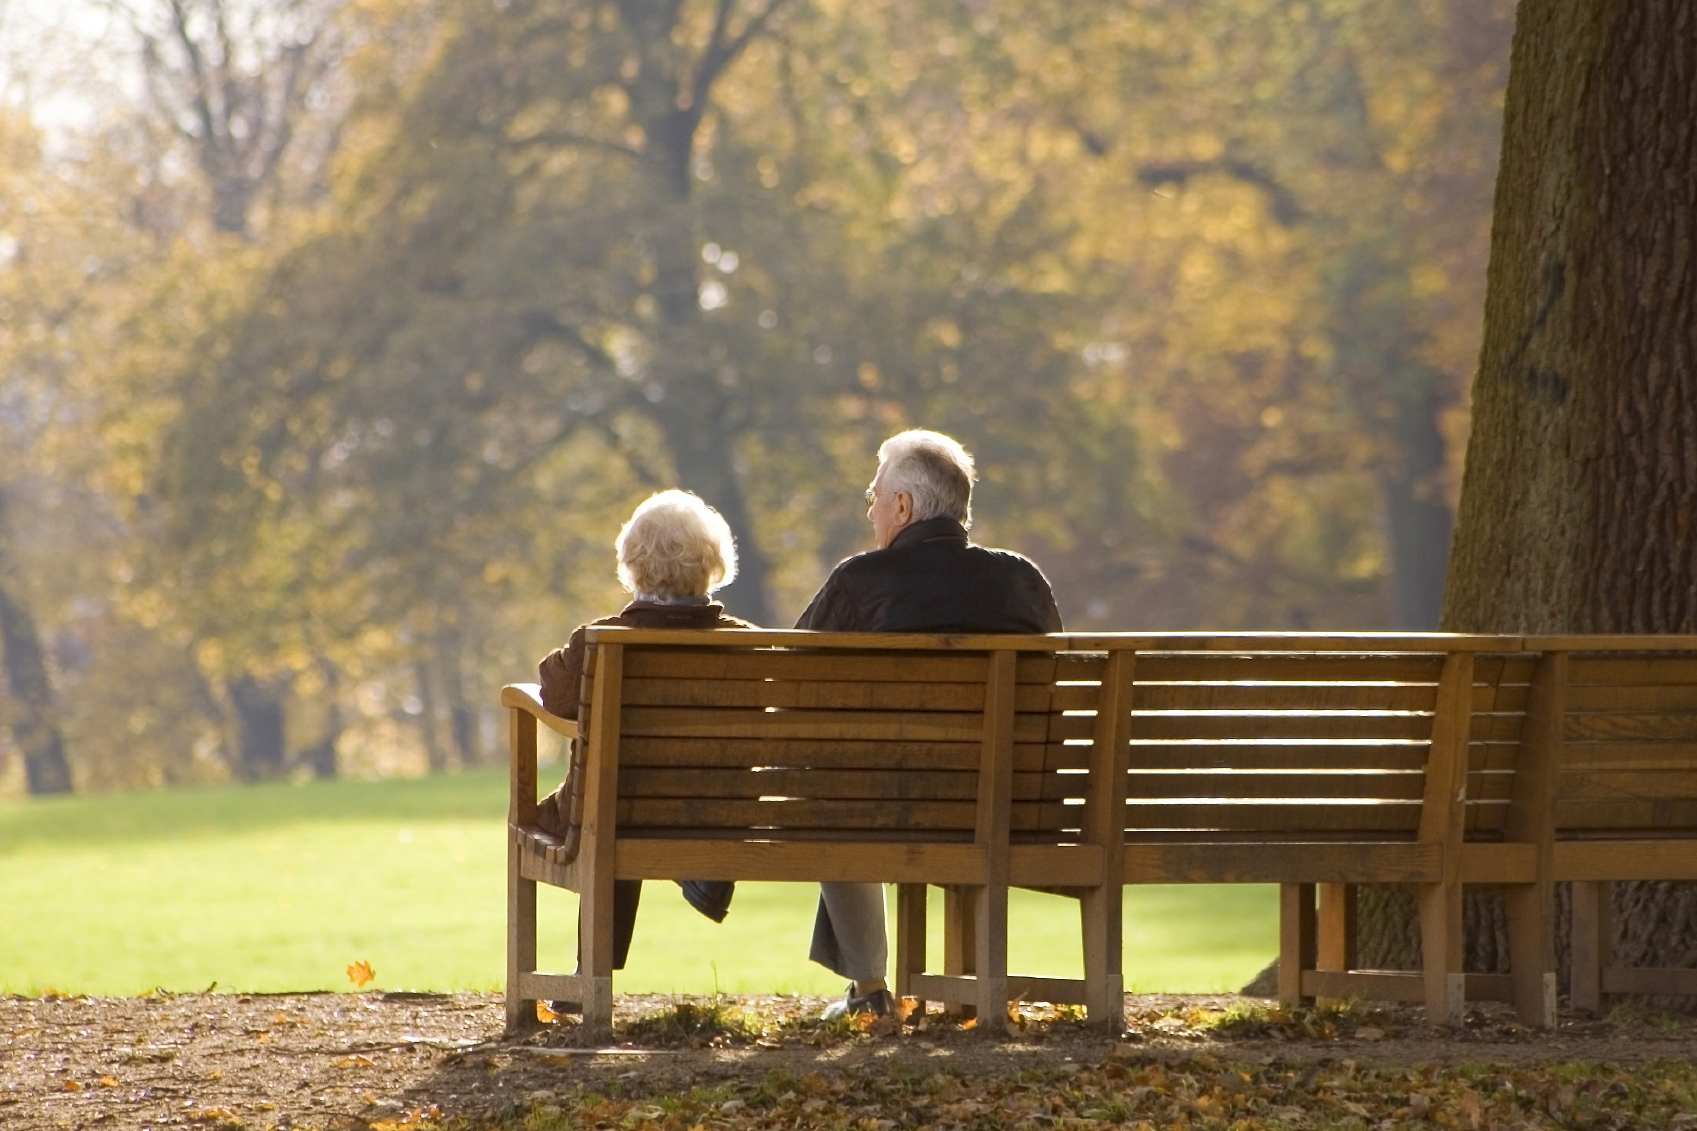 New CARES Act: COVID-19 Relief Available for Retirement Plans